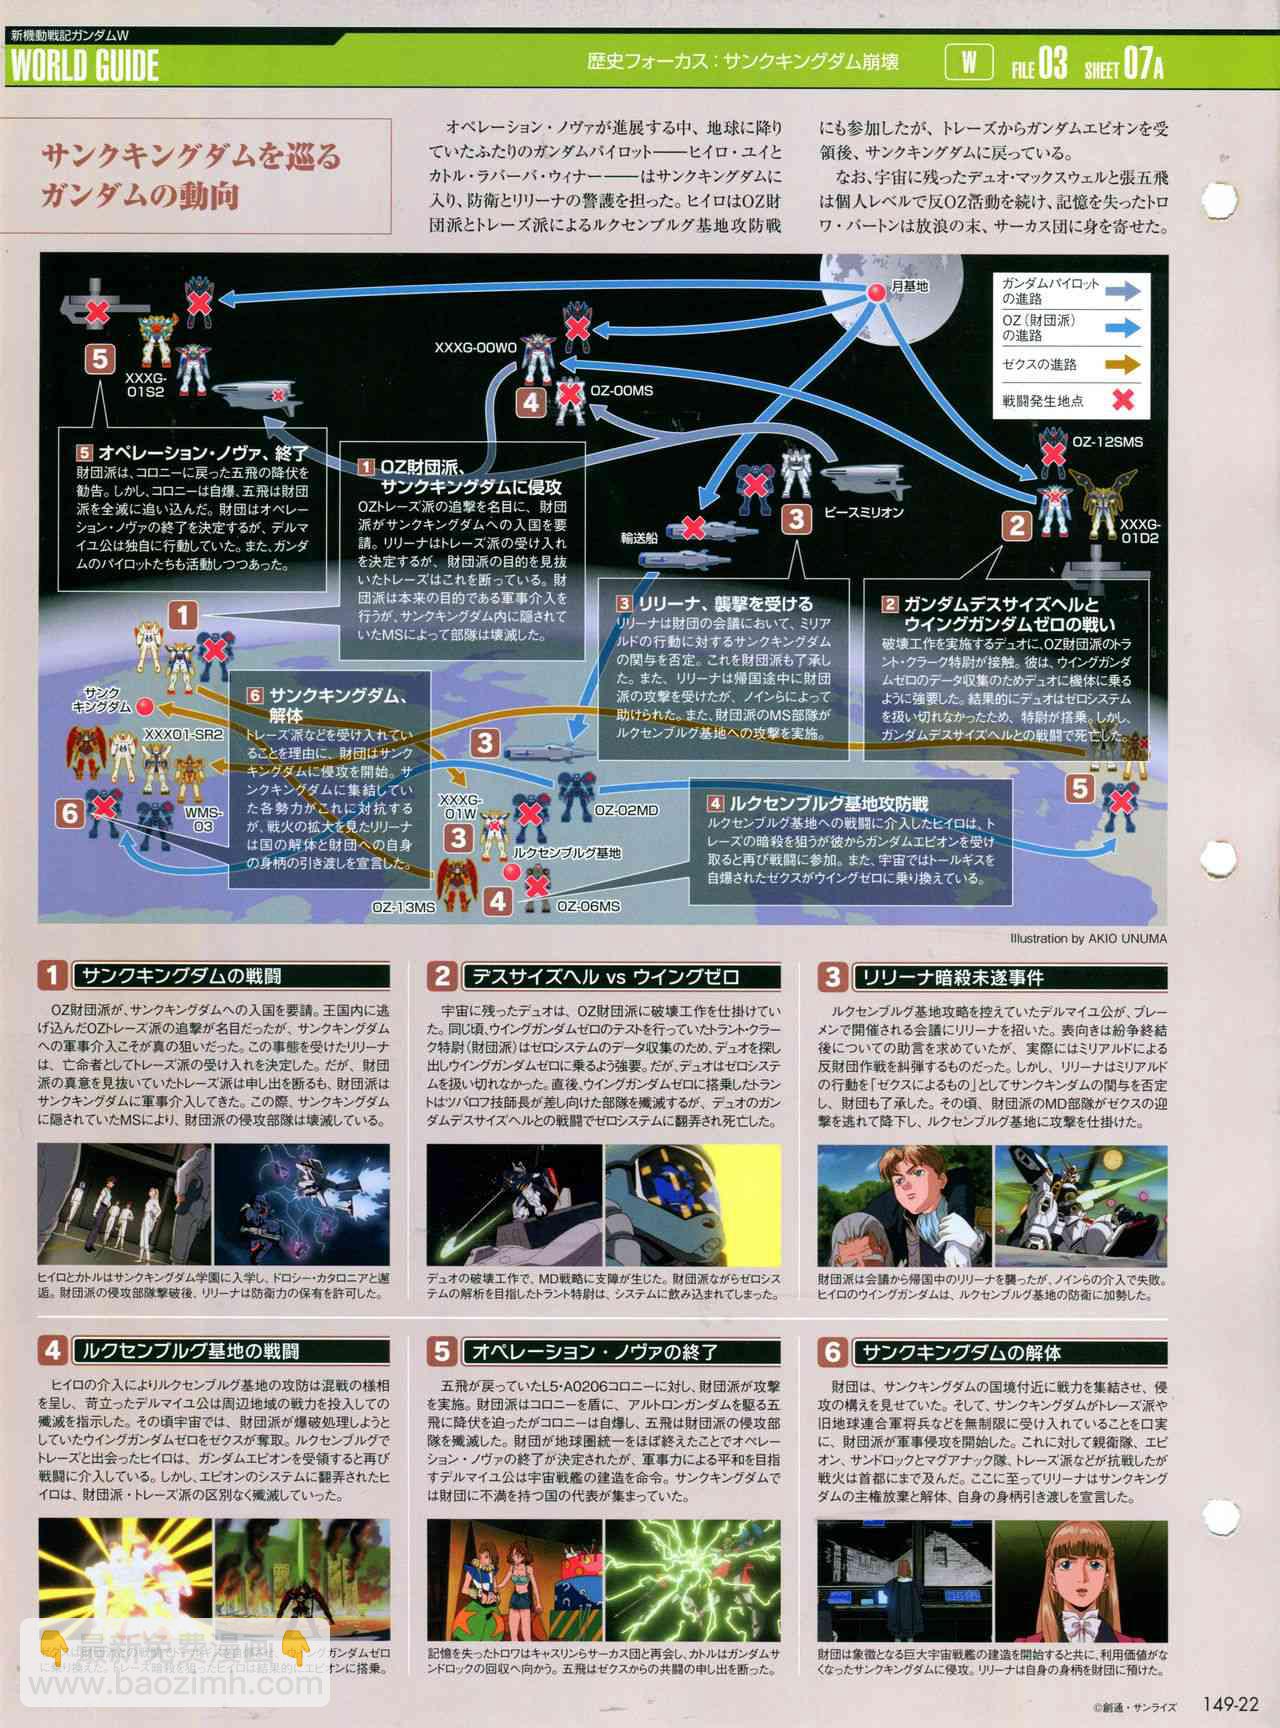 The Official Gundam Perfect File  - 149話 - 2